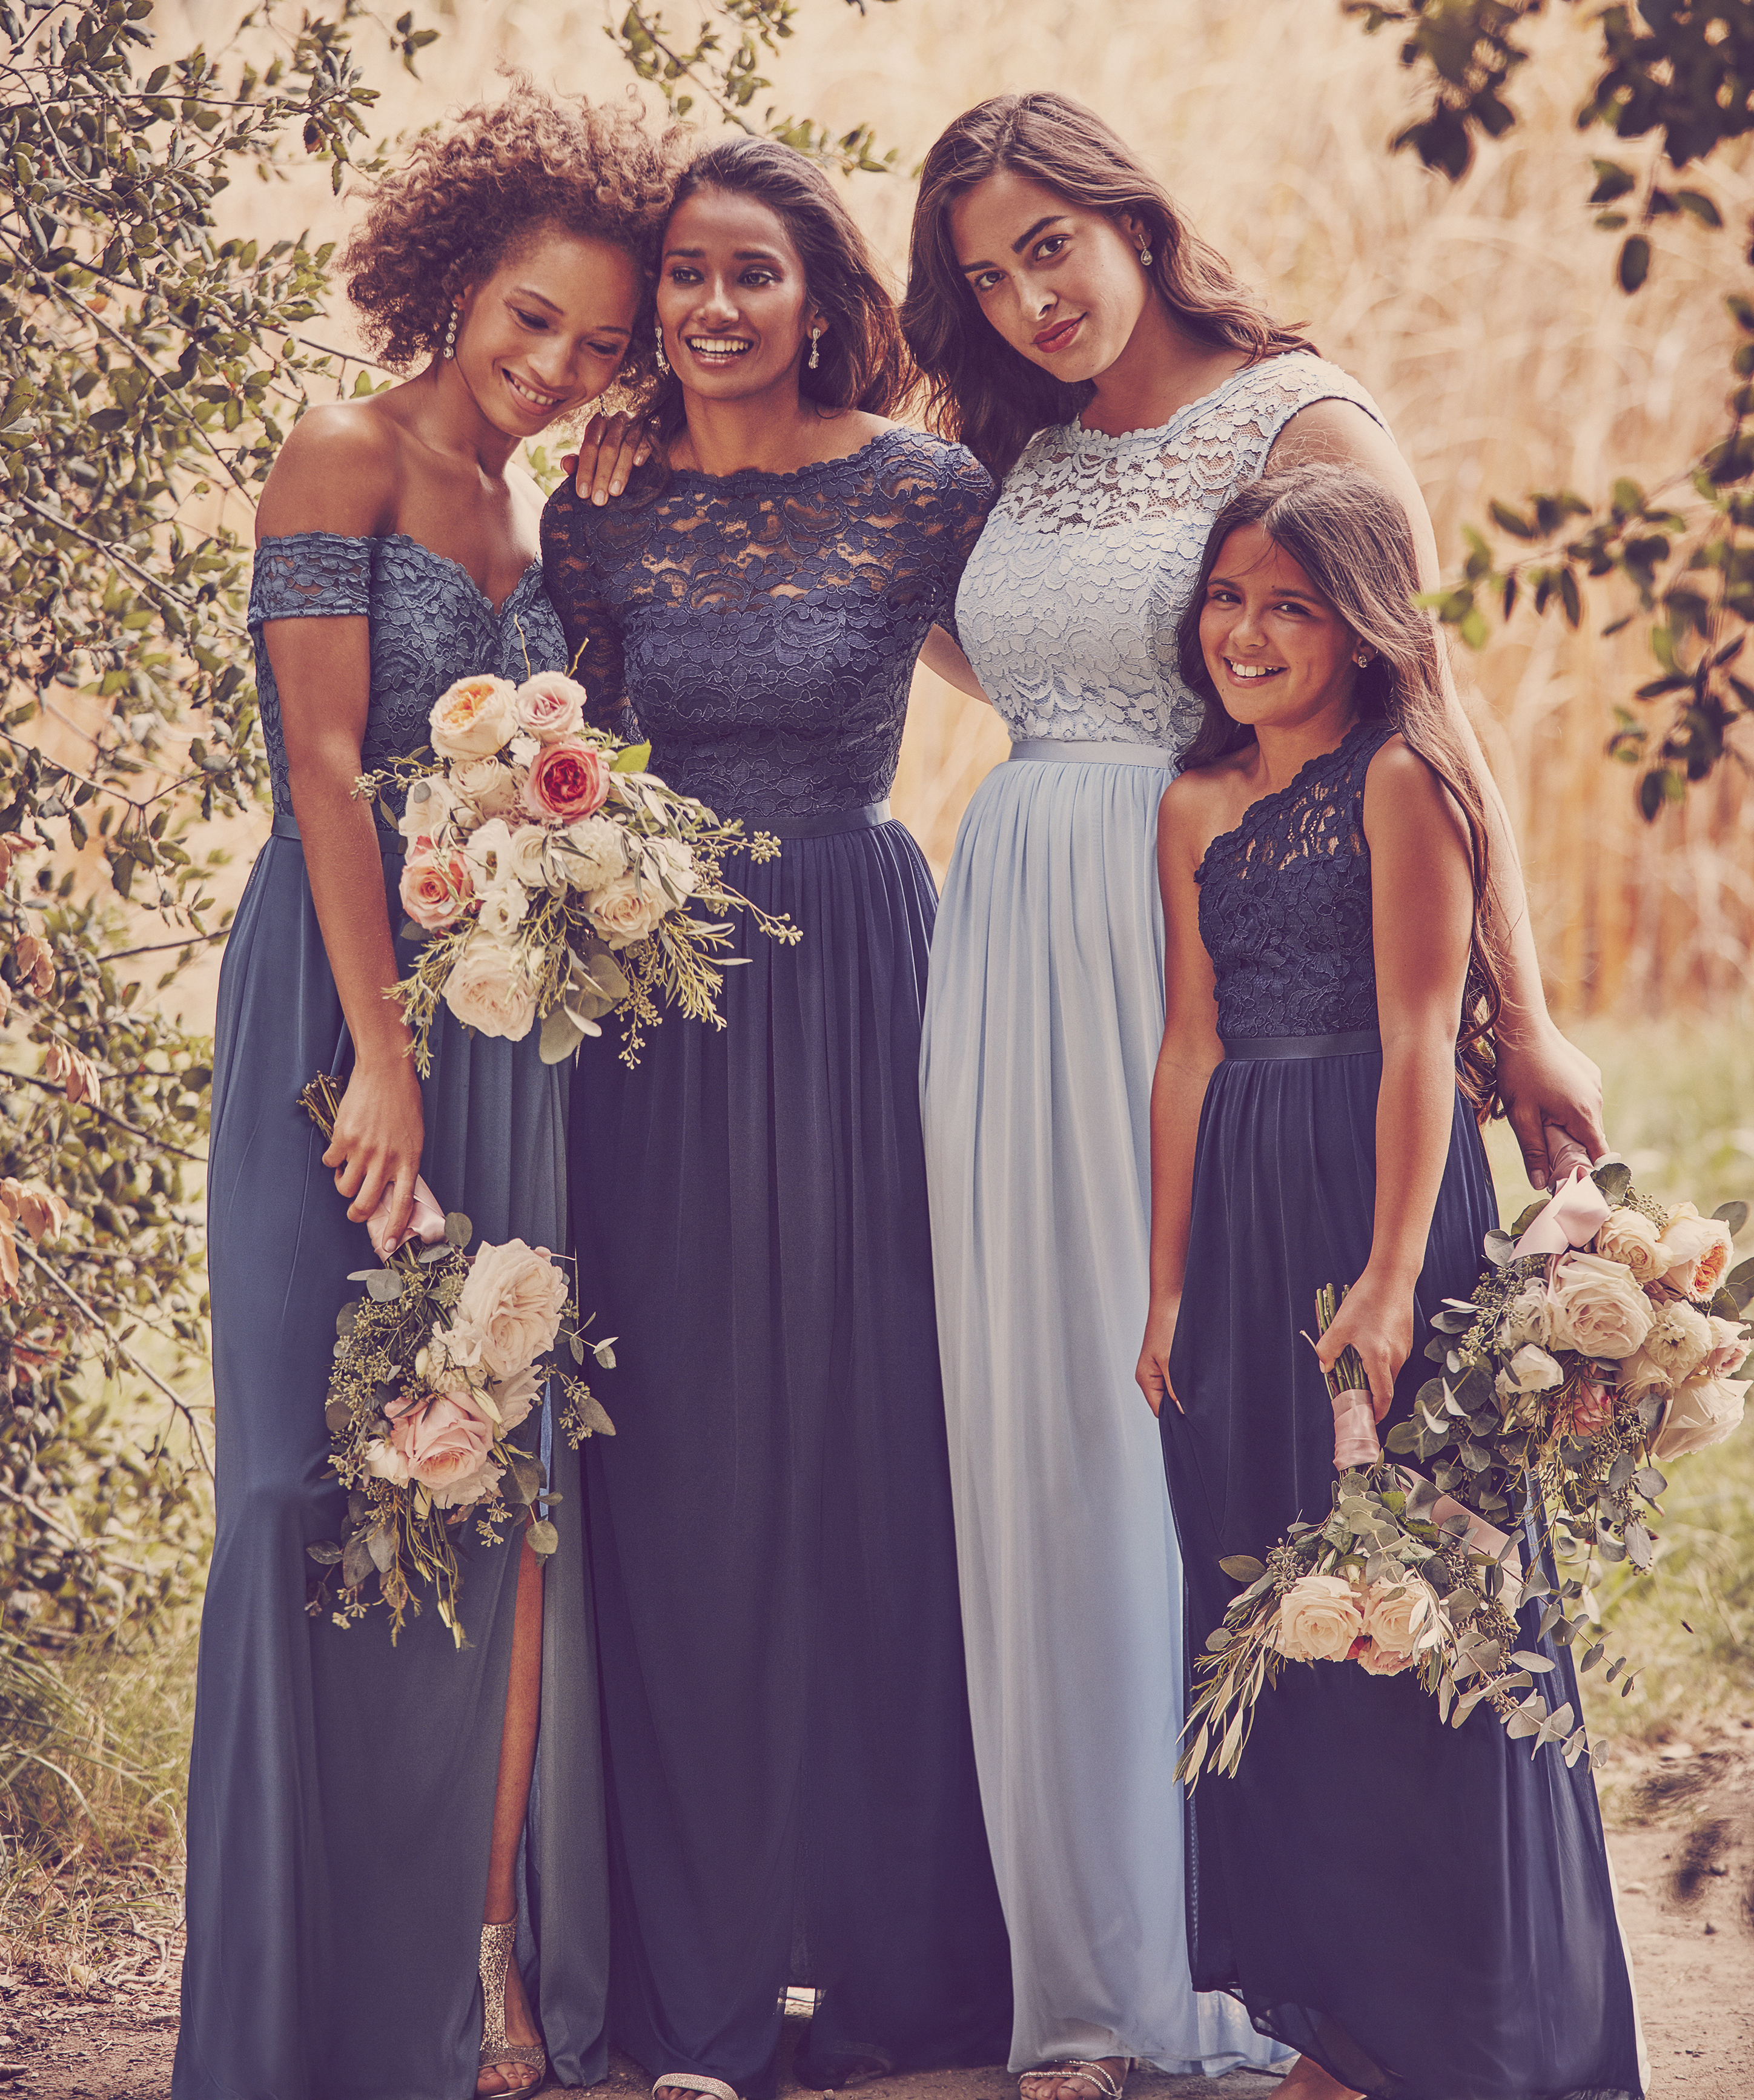 Women and child smiling in long lace bridesmaid dresses